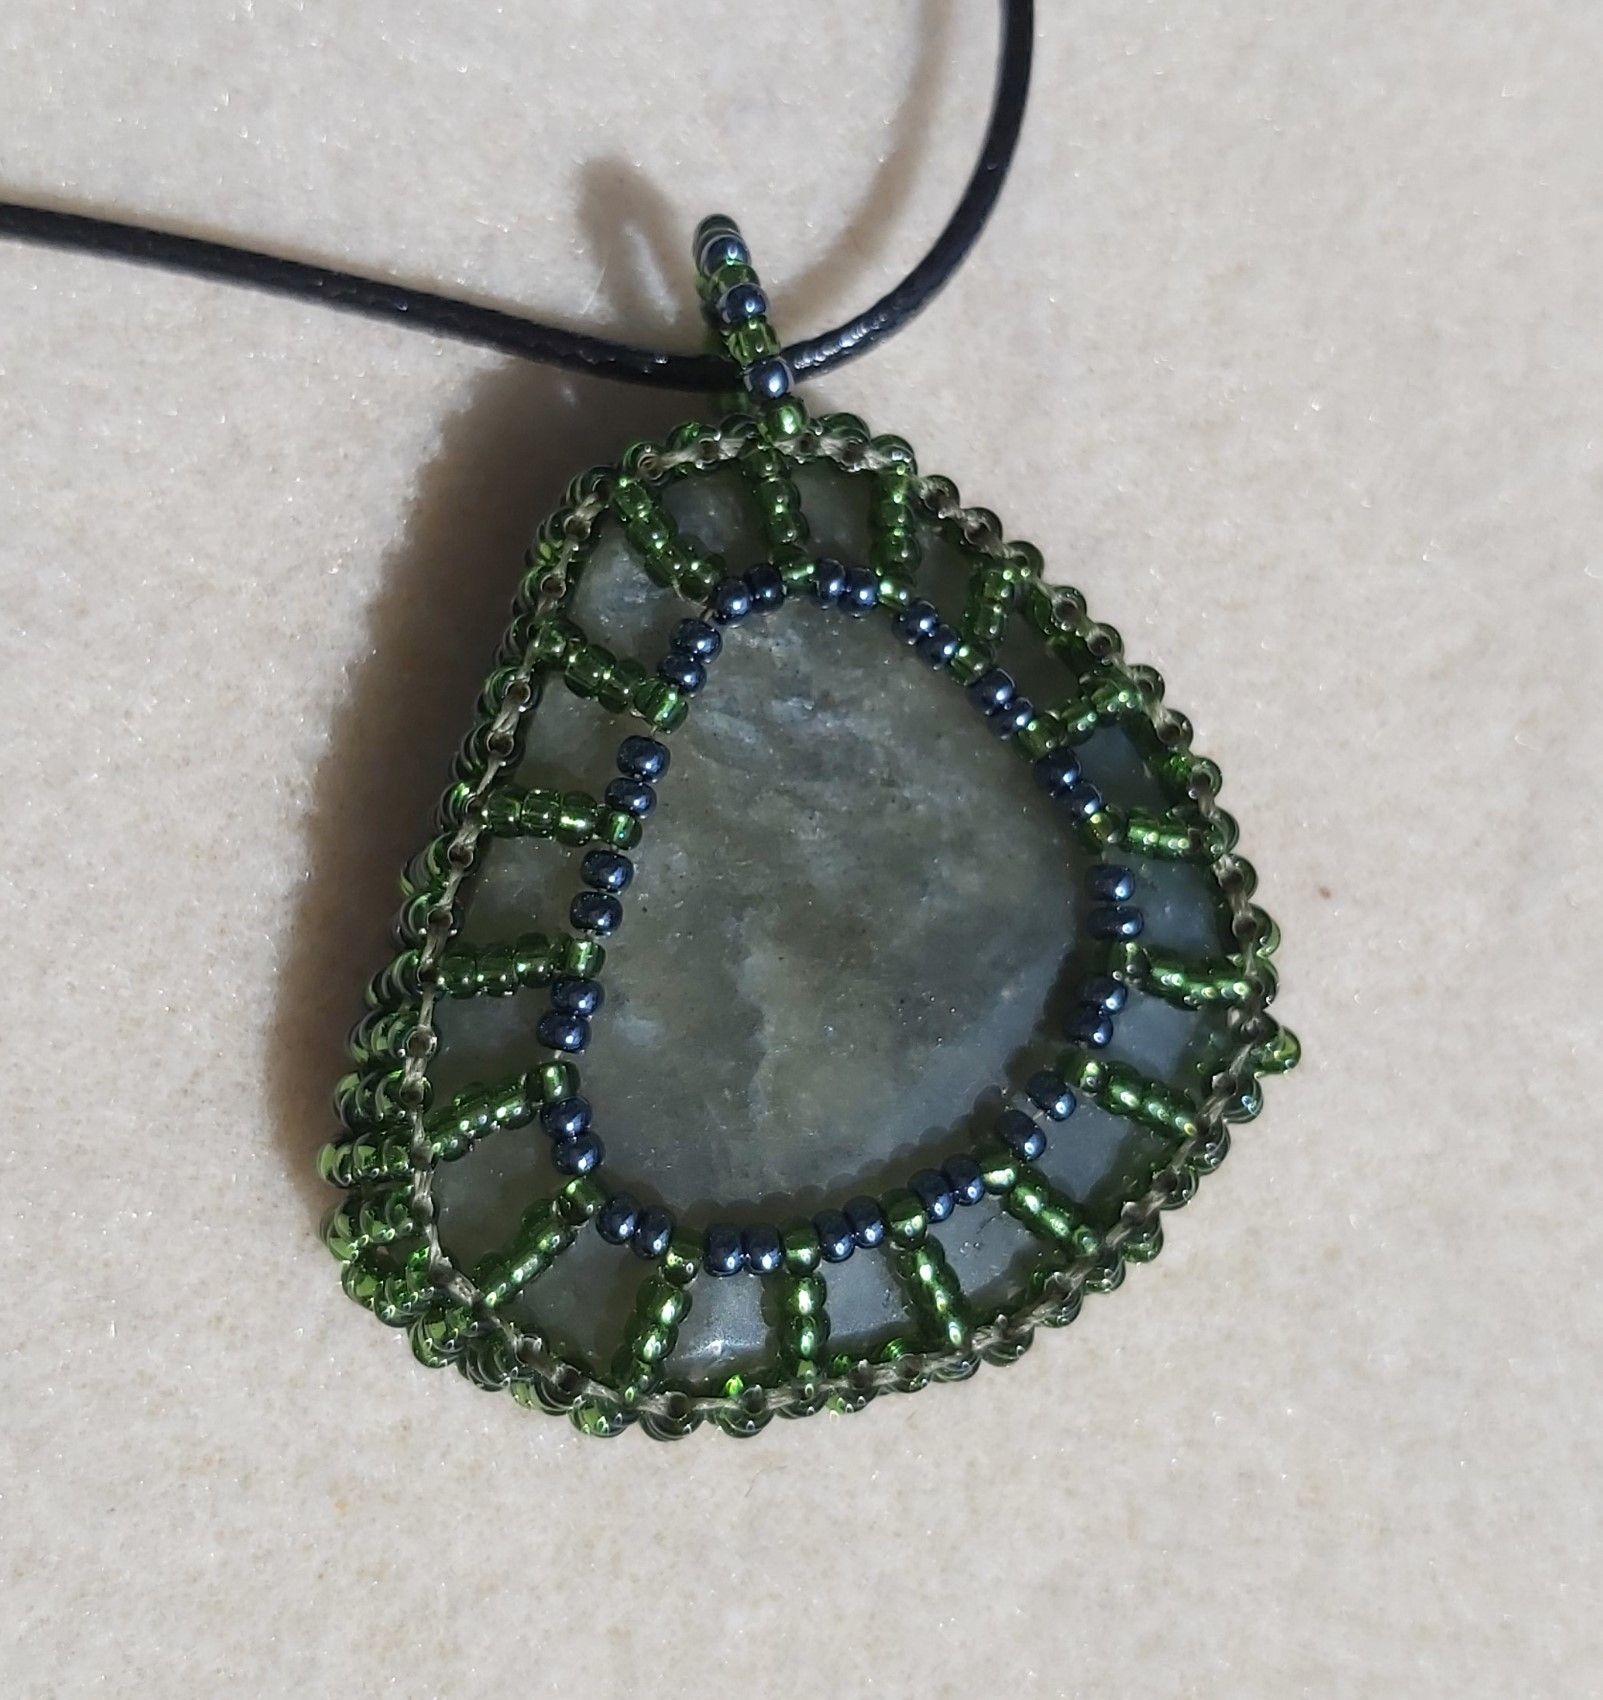 Approx. 70cts of Labradorite Gemstone wrapped in 11/O Olive Seed beads, with 18" Black Cord Chain.